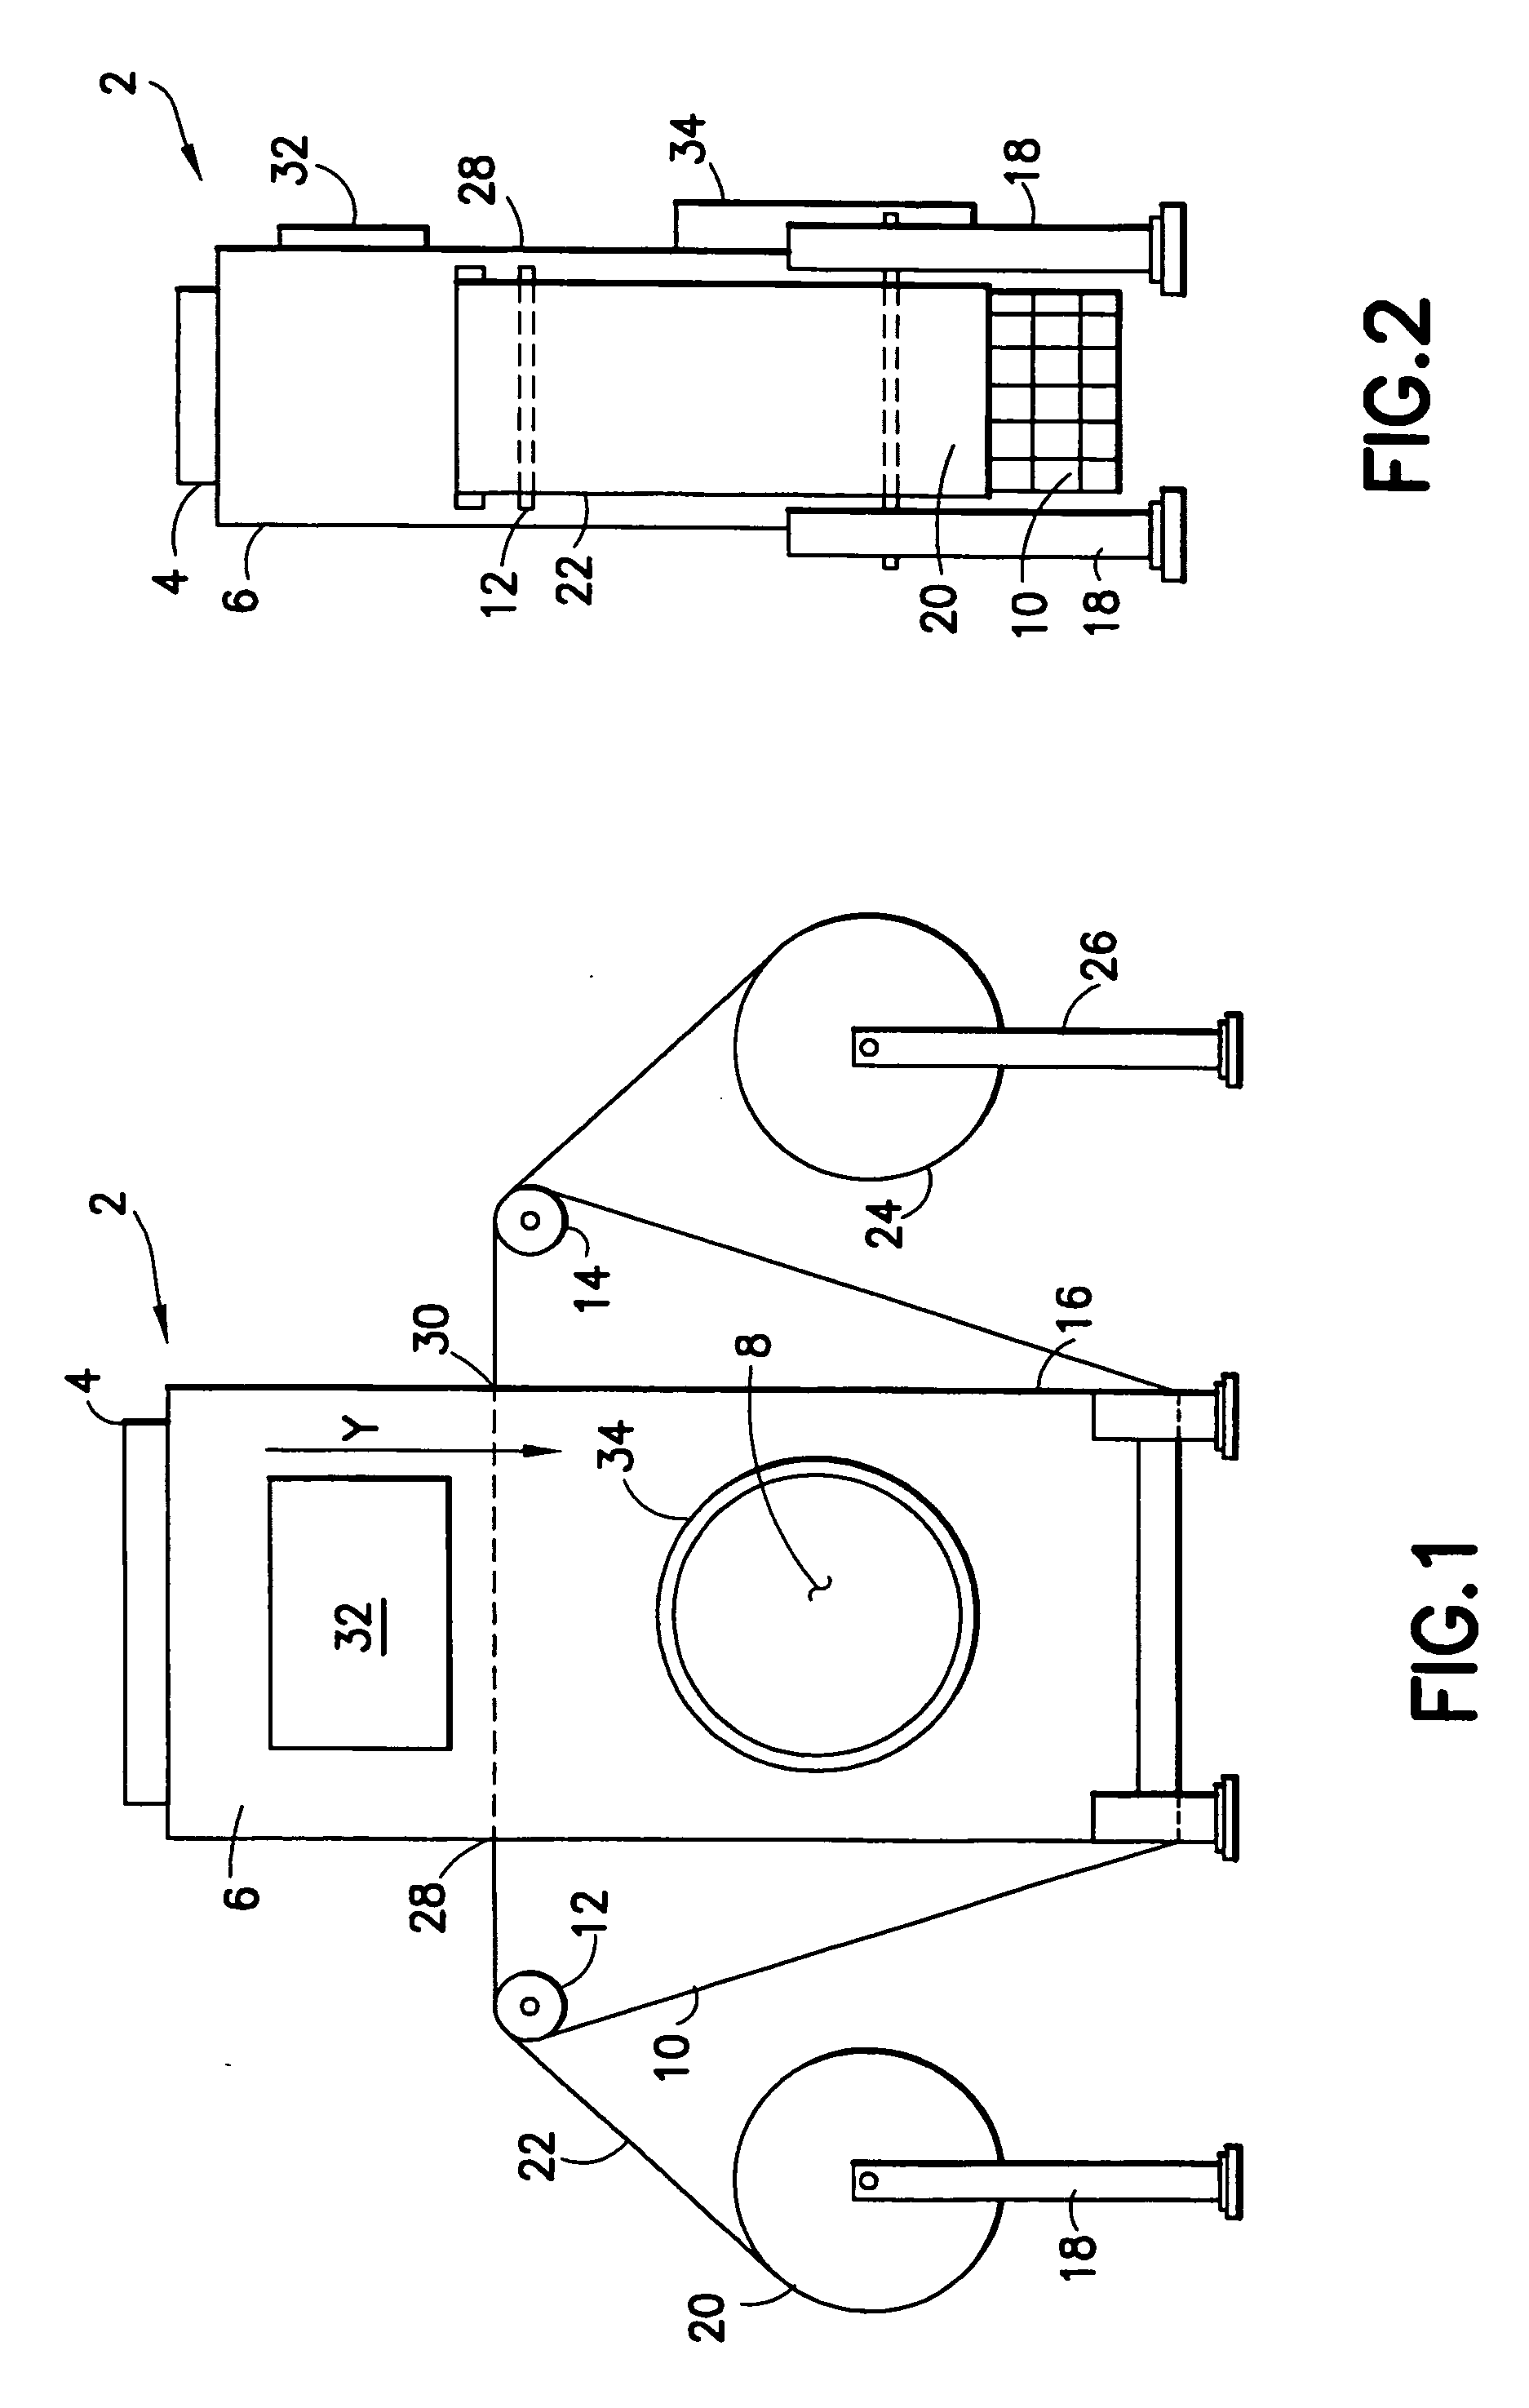 Apparatus and method for removing contaminants from a gas stream